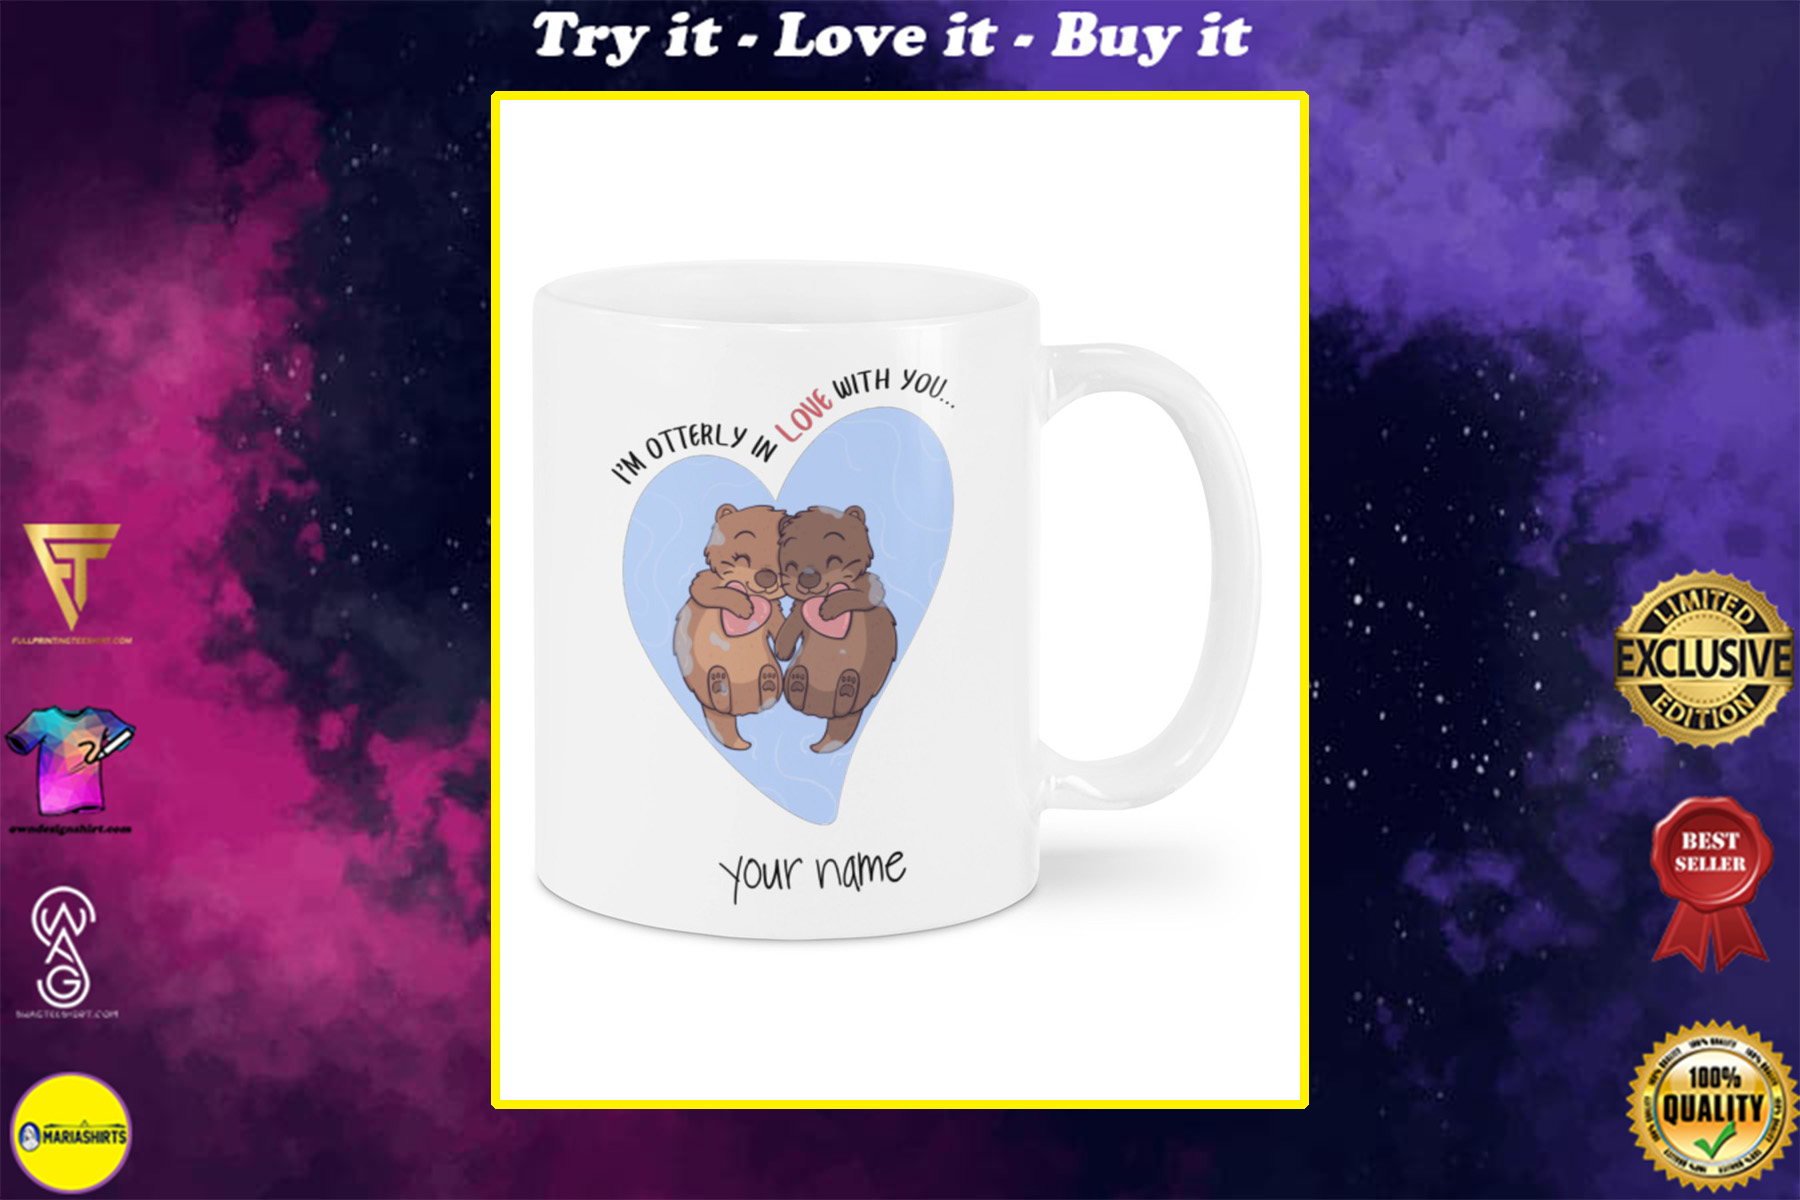 i'm otterly in love with you custom your name mug